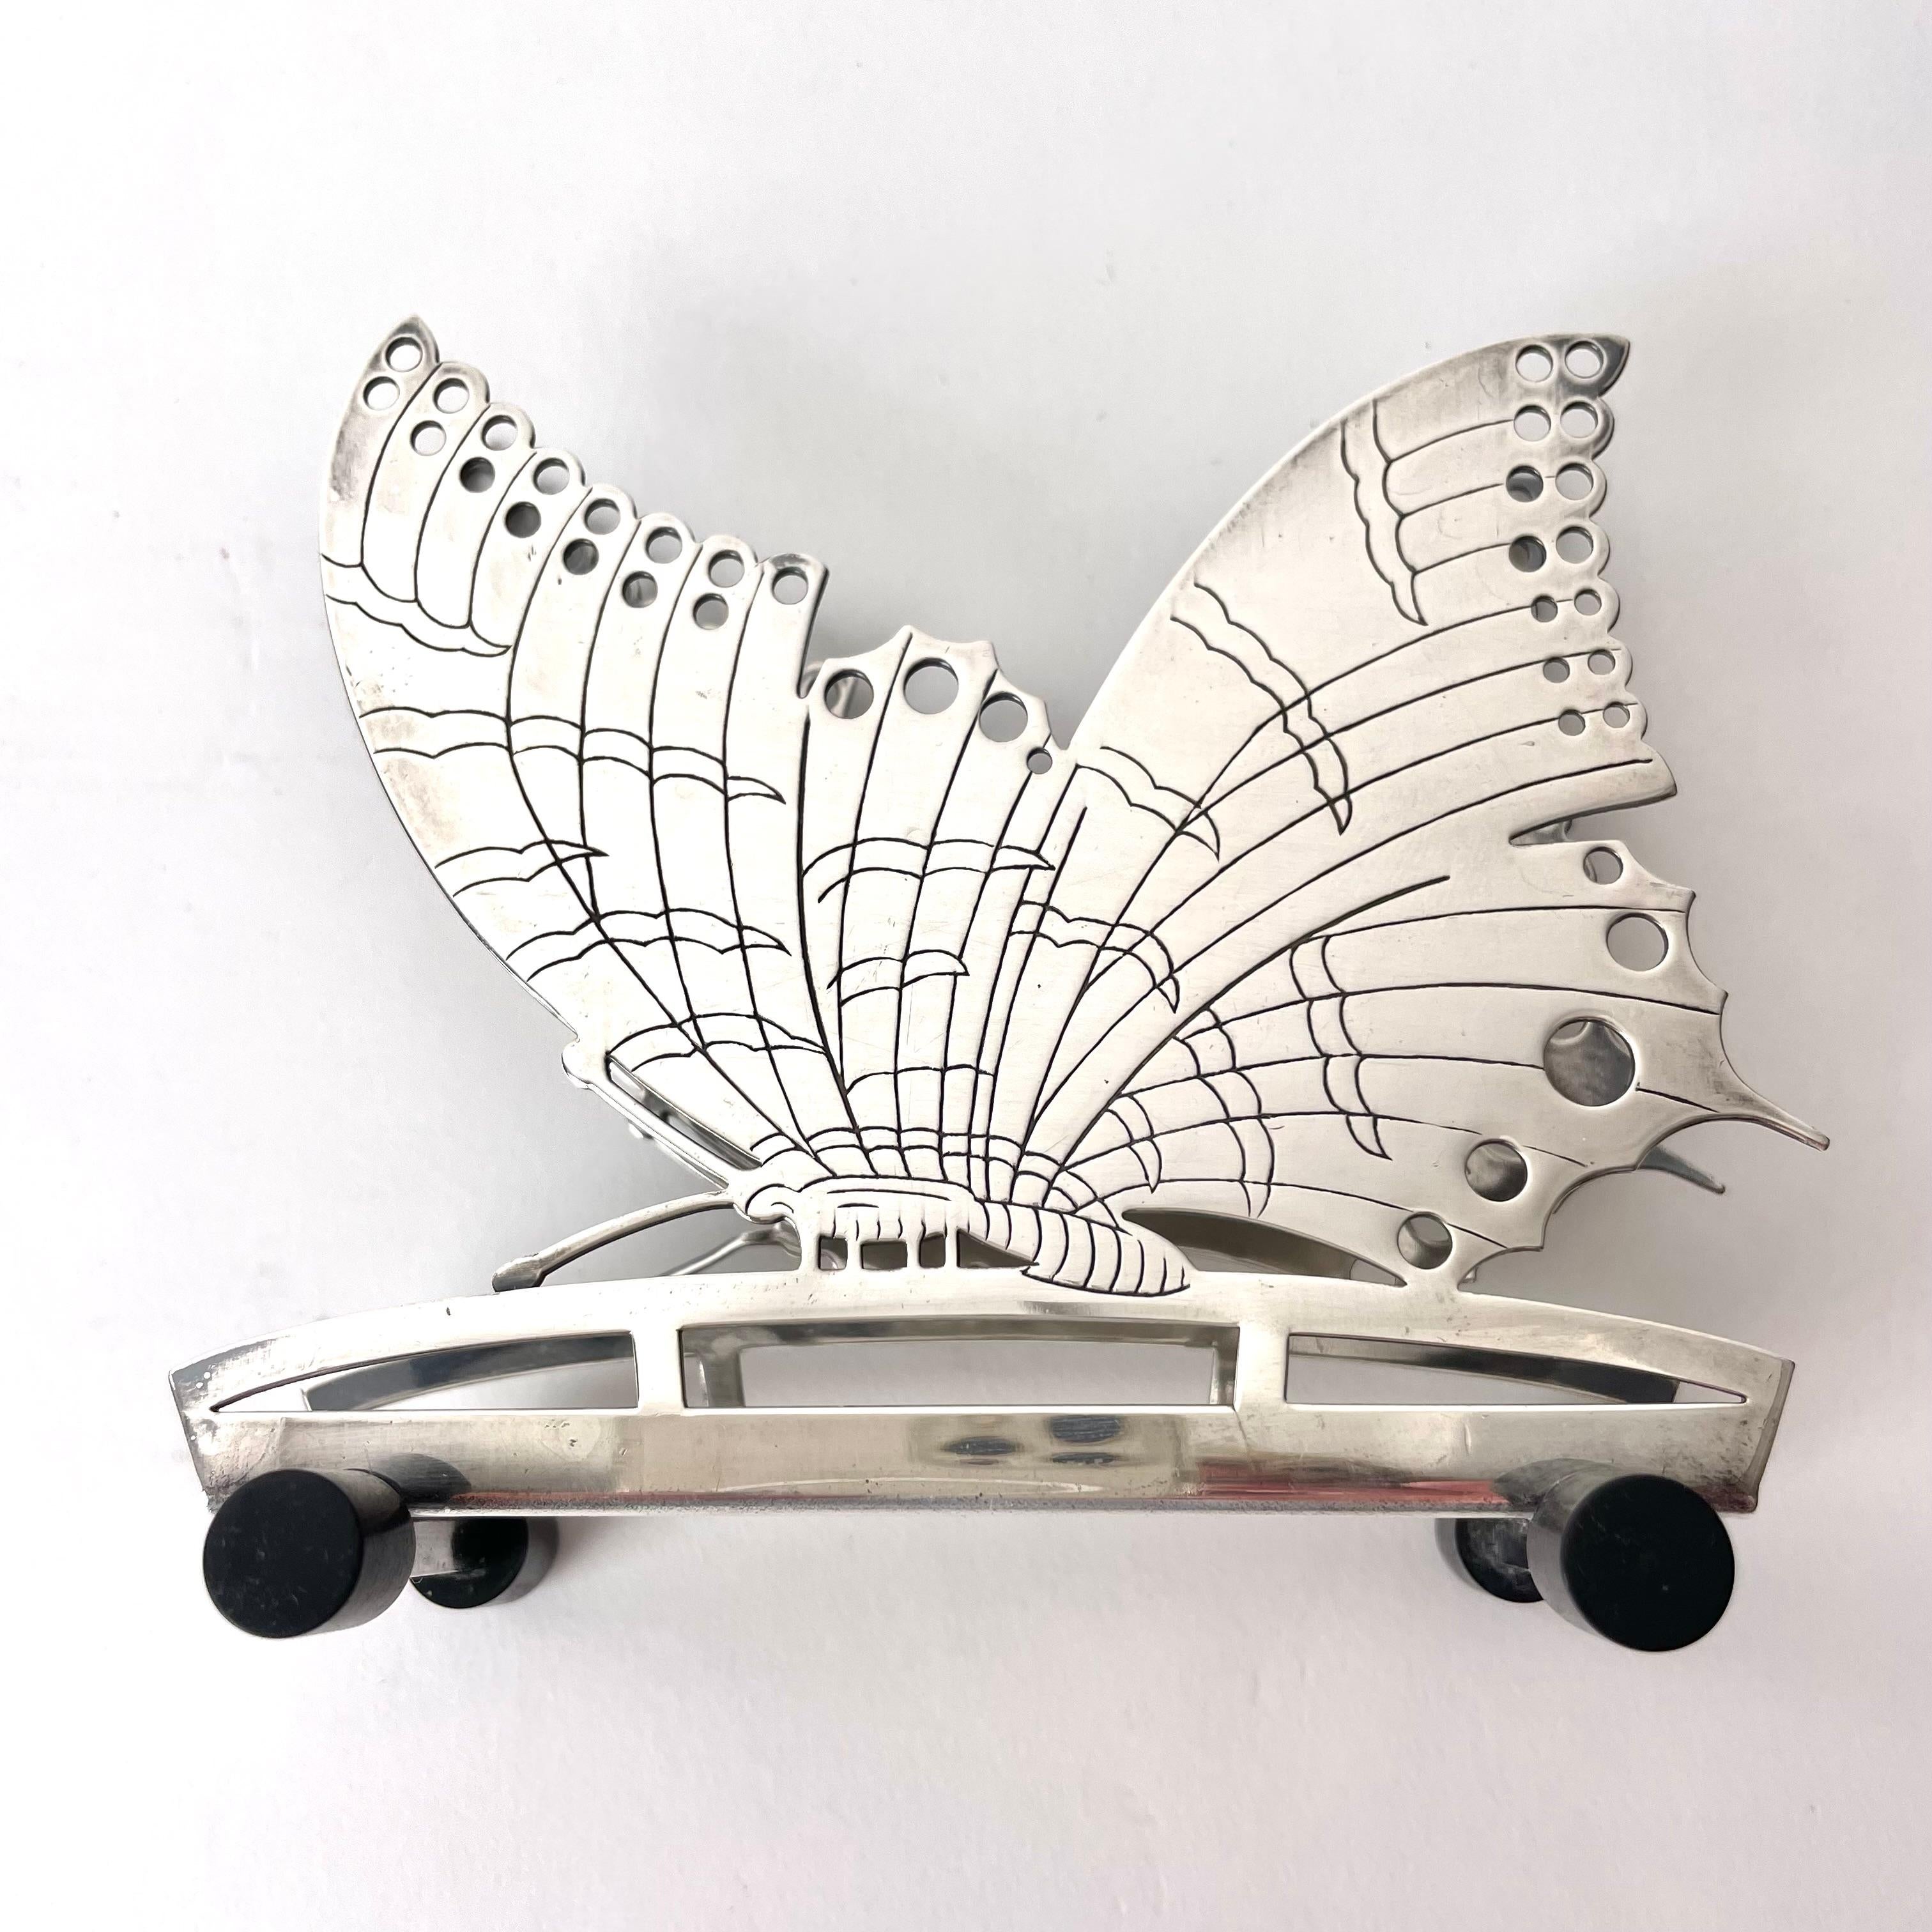 Early 20th Century Art Deco Butterfly Napkin Holder Nickel Silver and Bakelite, 1920s-1930s